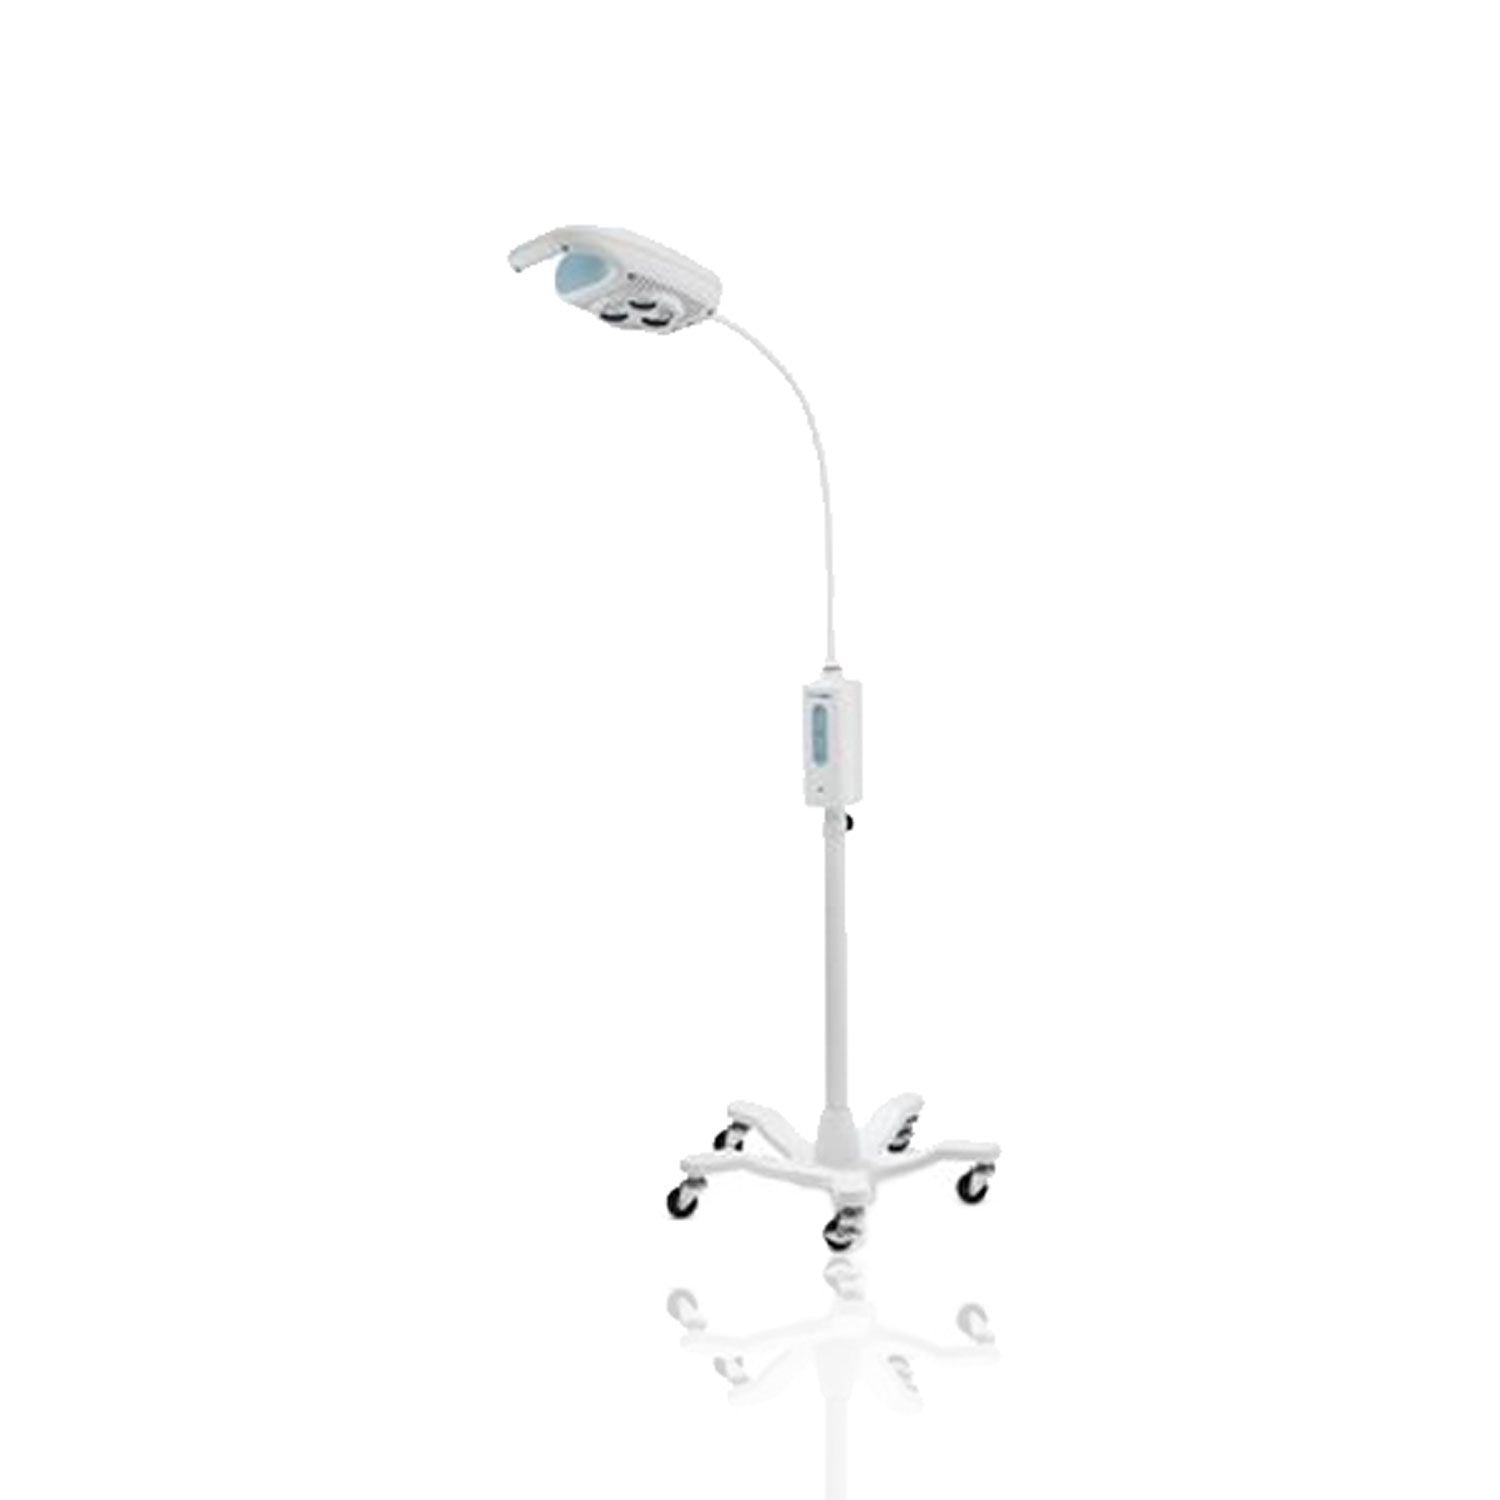 Welch Allyn GS600 Minor Procedure LED, Mobile Stand